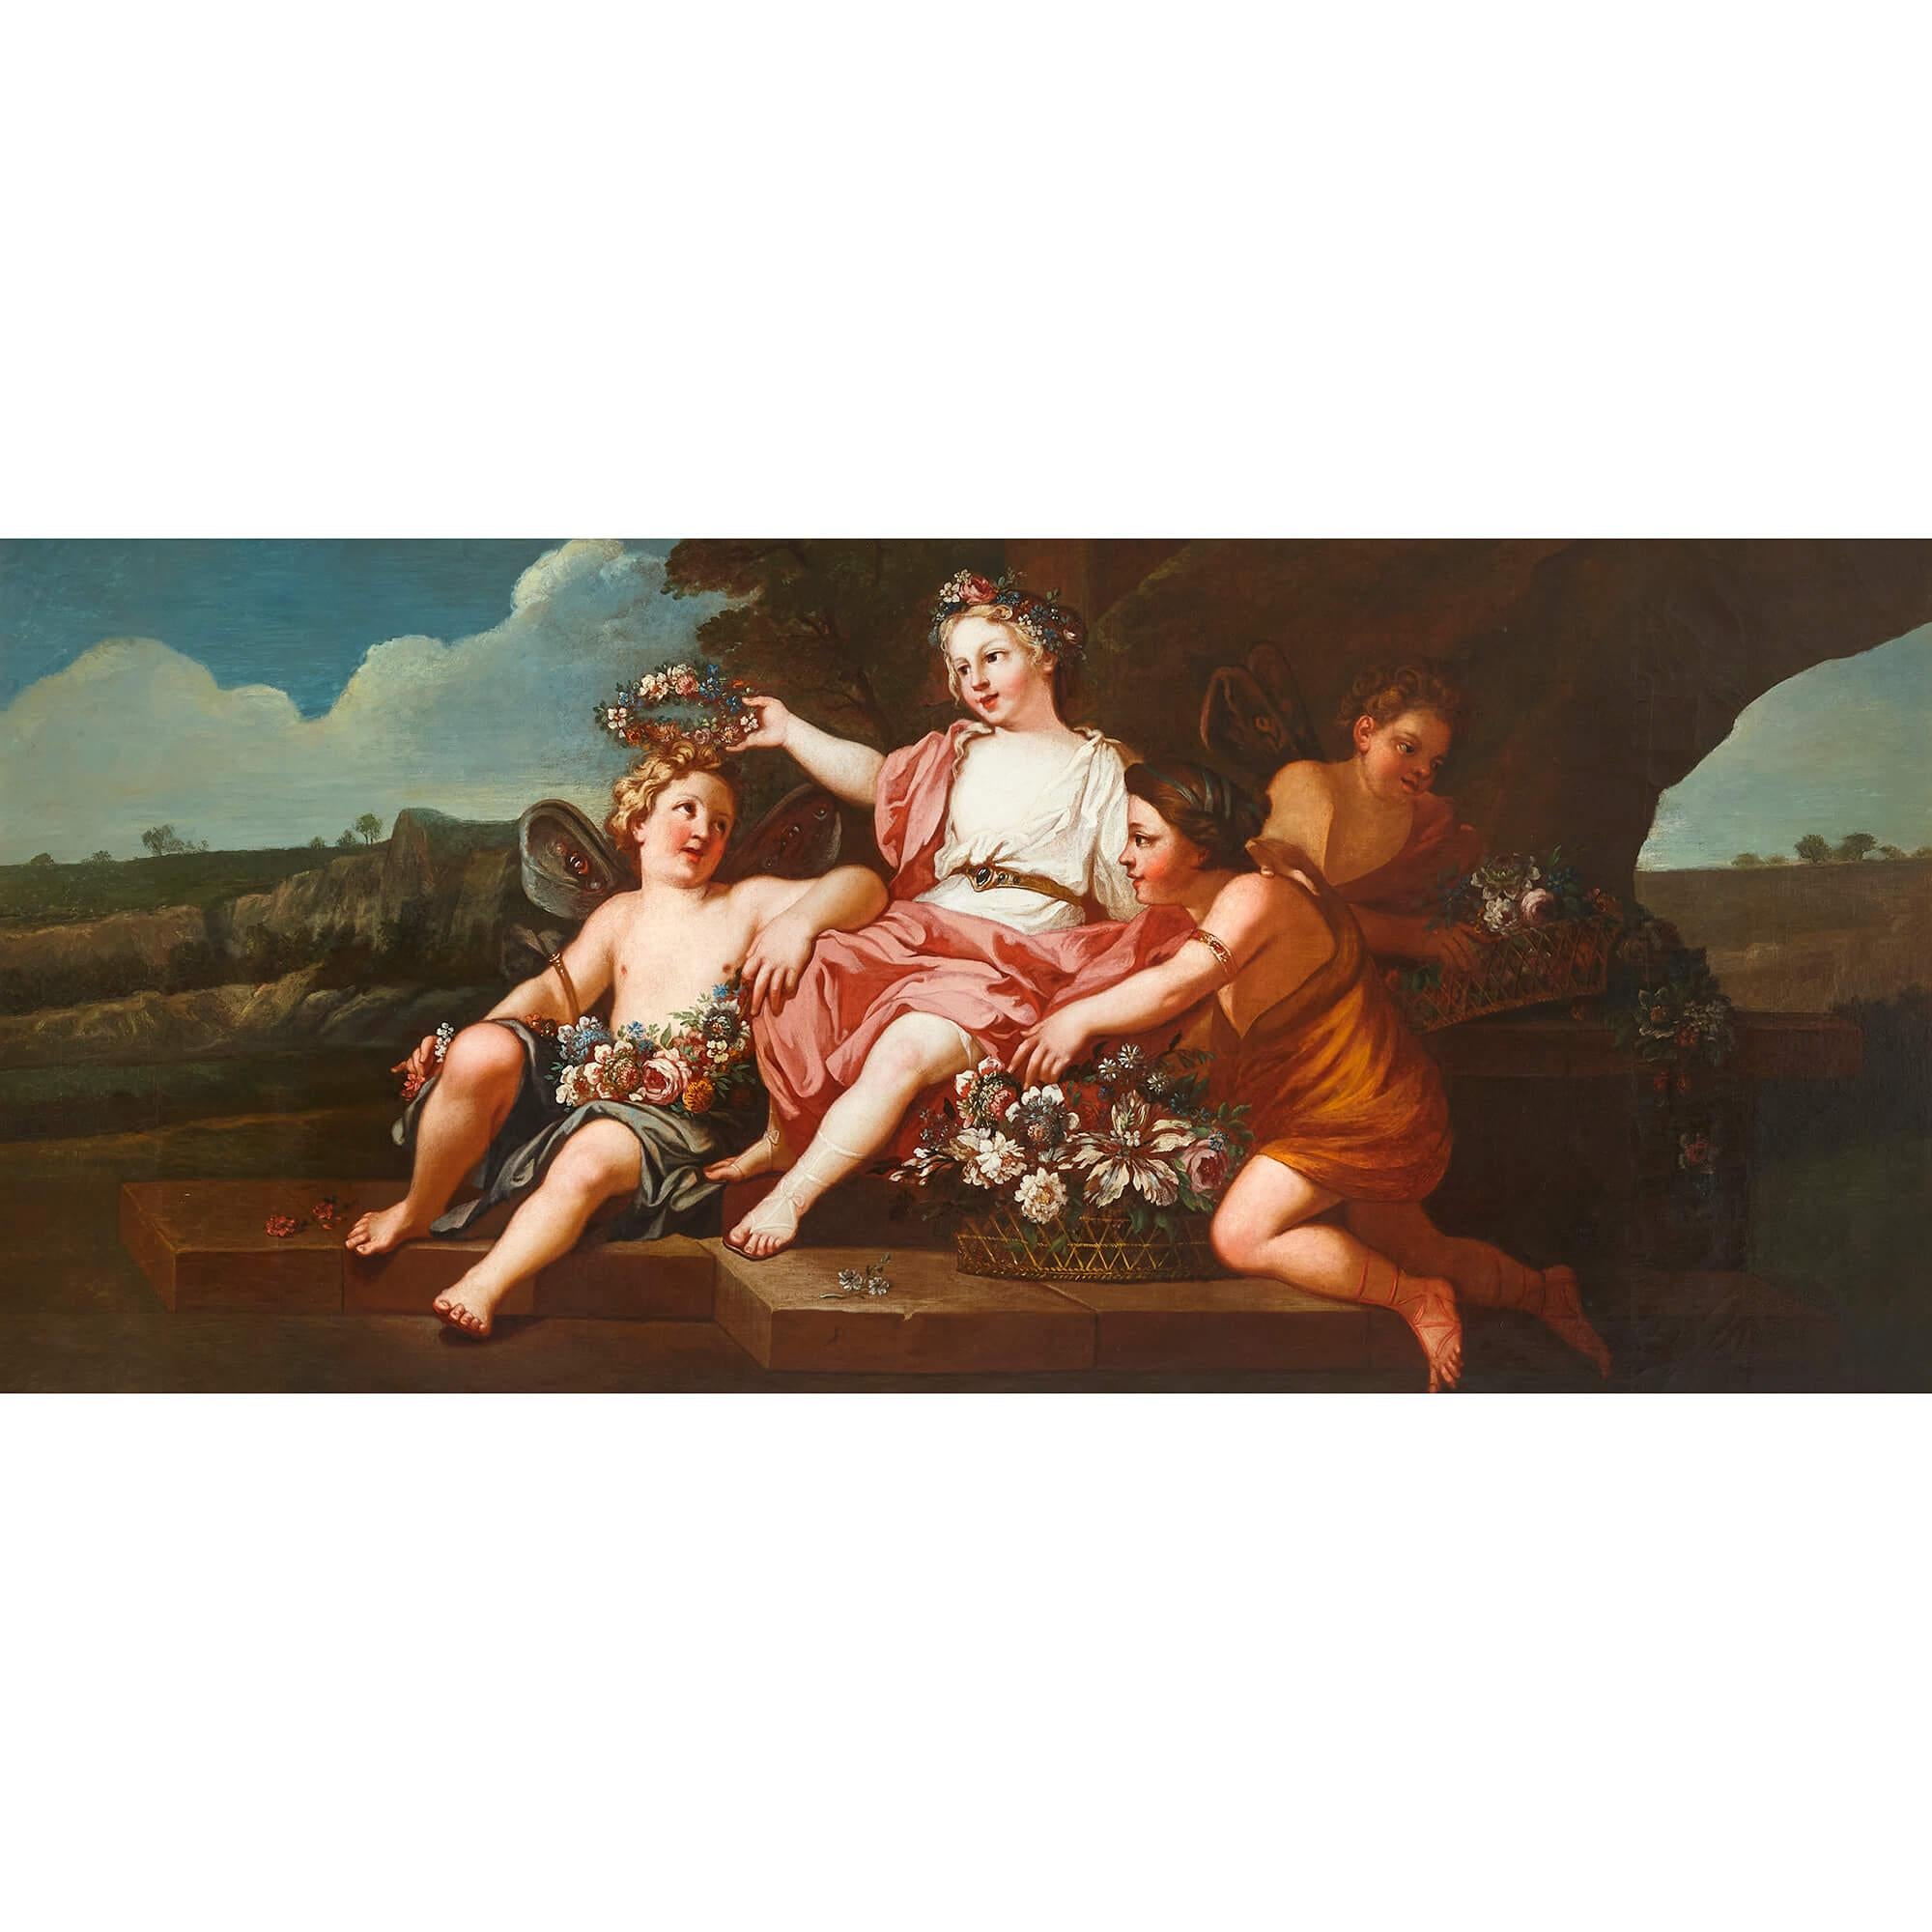 Set of four very large 18th century Italian Rococo paintings of the Four Seasons - Brown Figurative Painting by Unknown